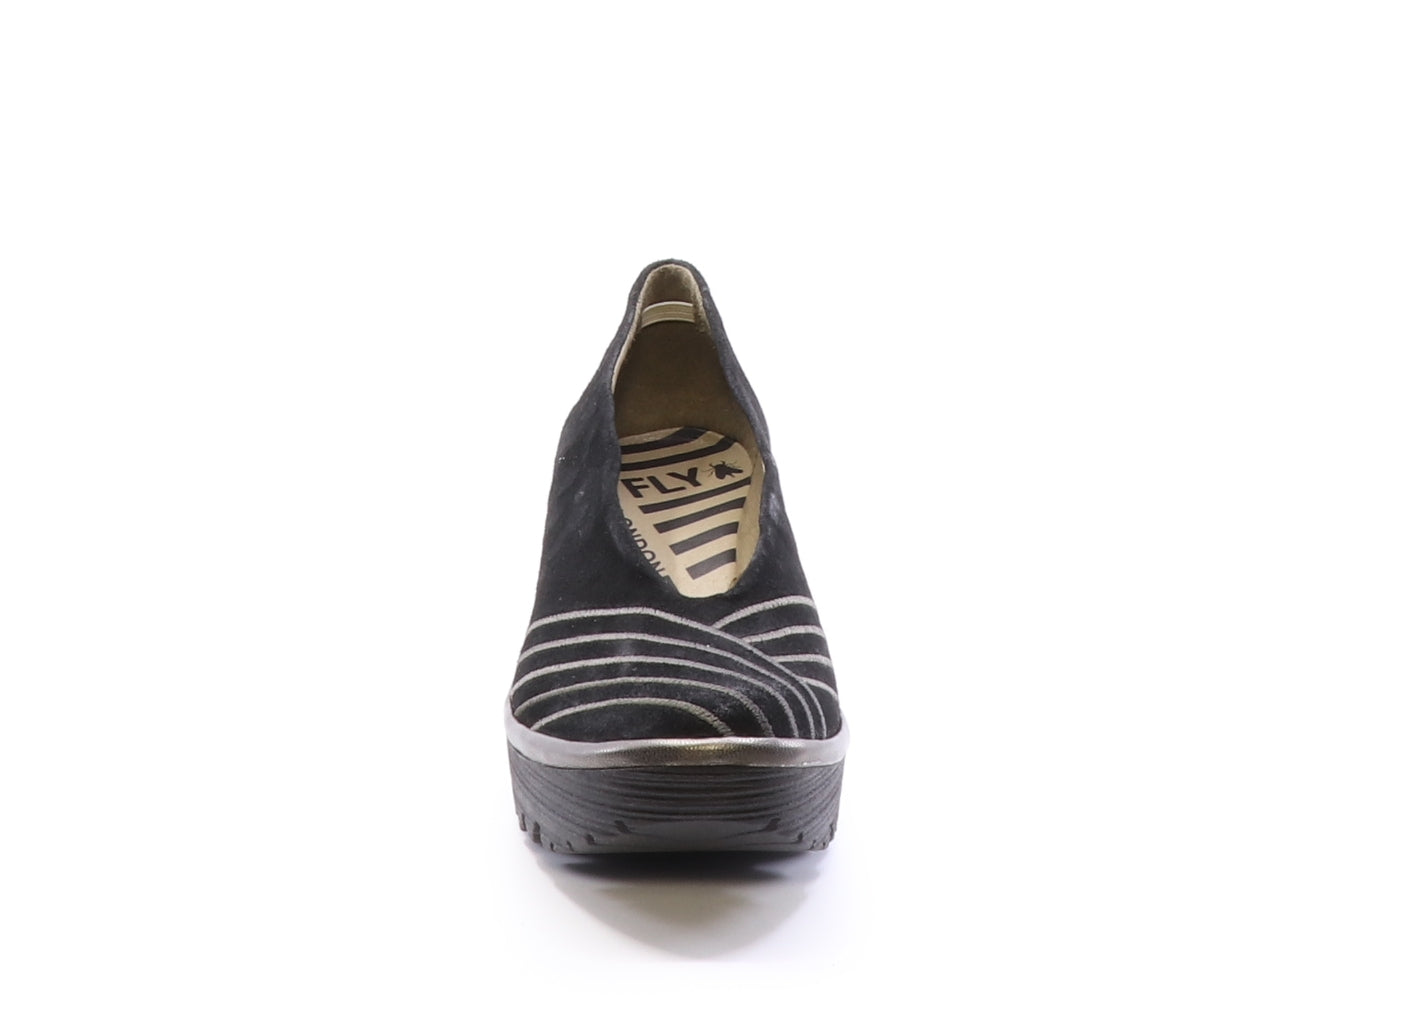 Fly London Yaku in black bronze shoe available at Shoe Muse